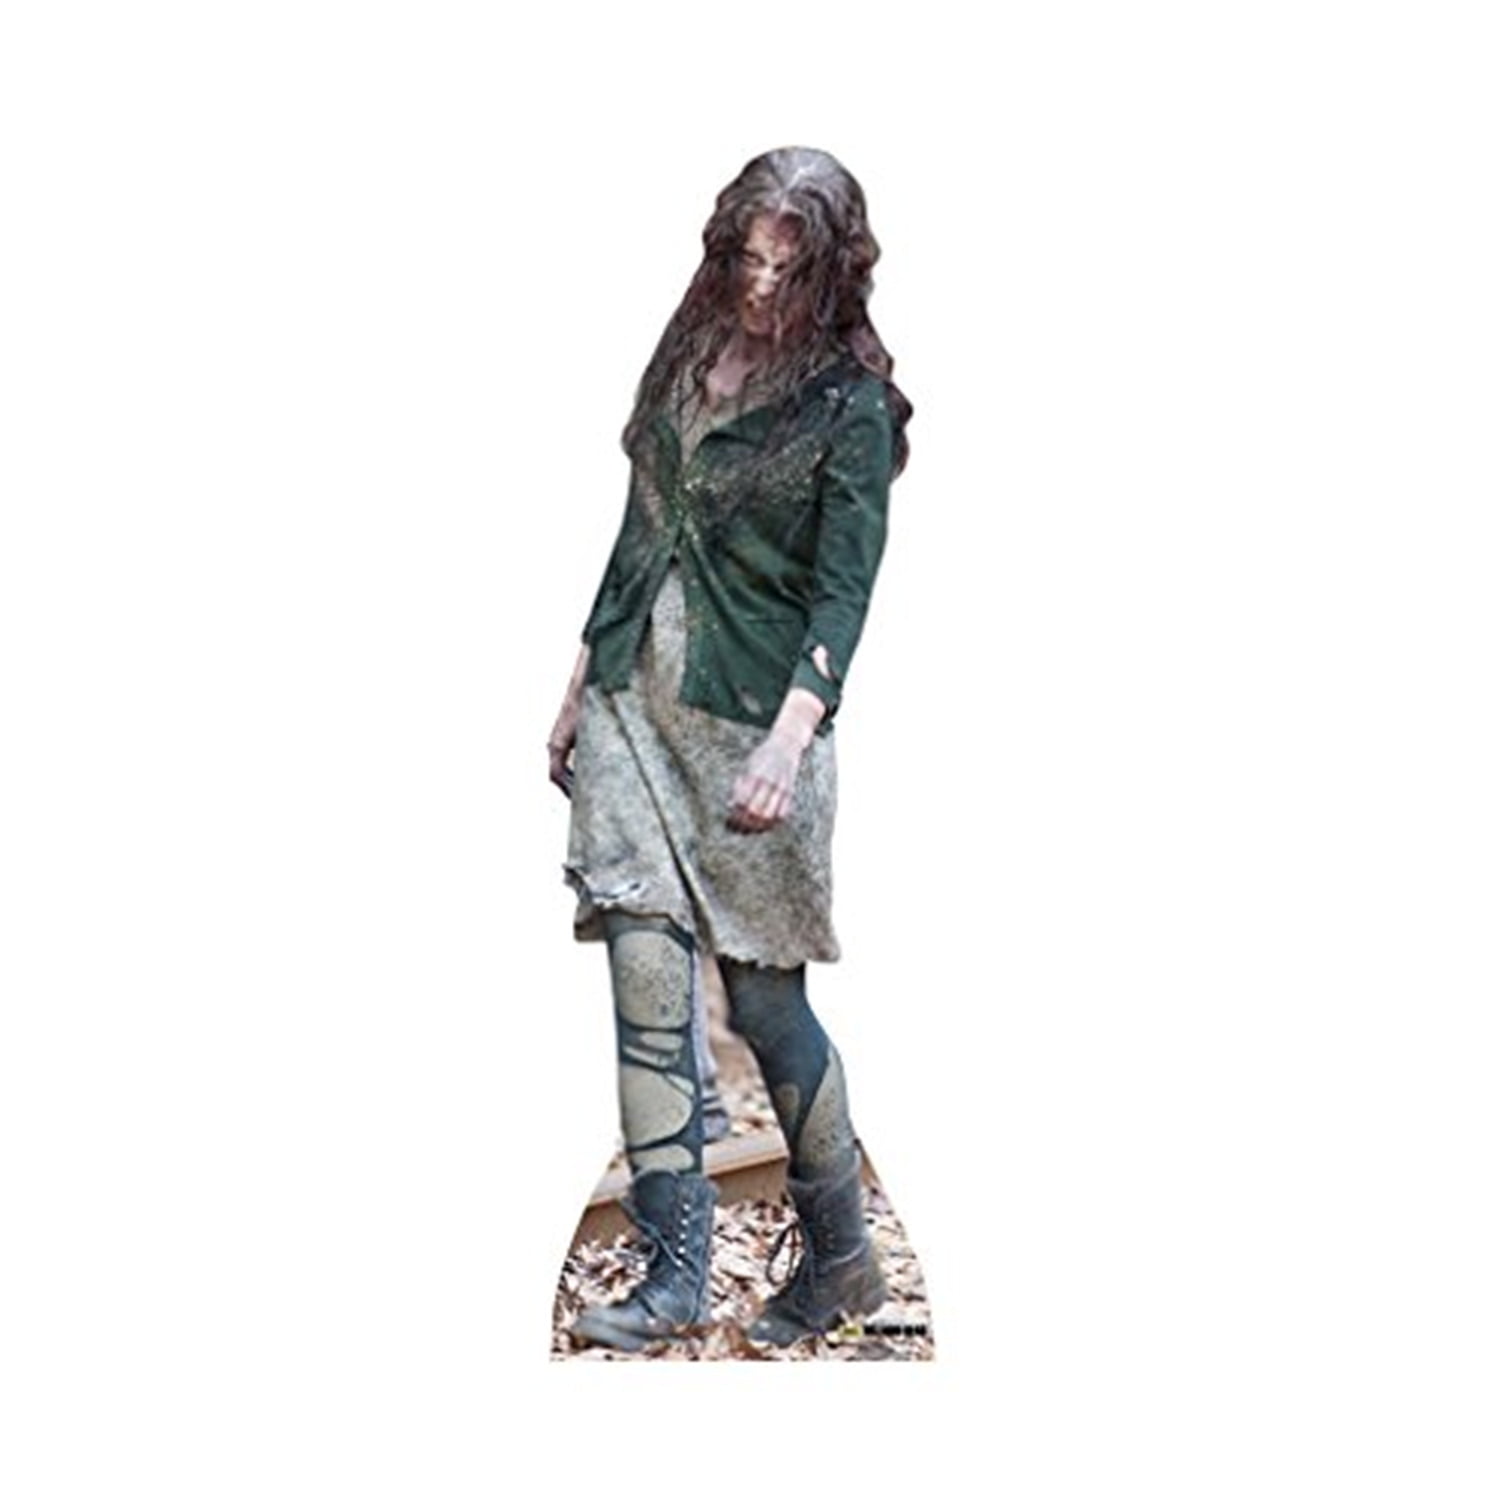 Picture of Advanced Graphics 2089 67 x 22 in. Walker 02 - The Walking Dead Cardboard Standup